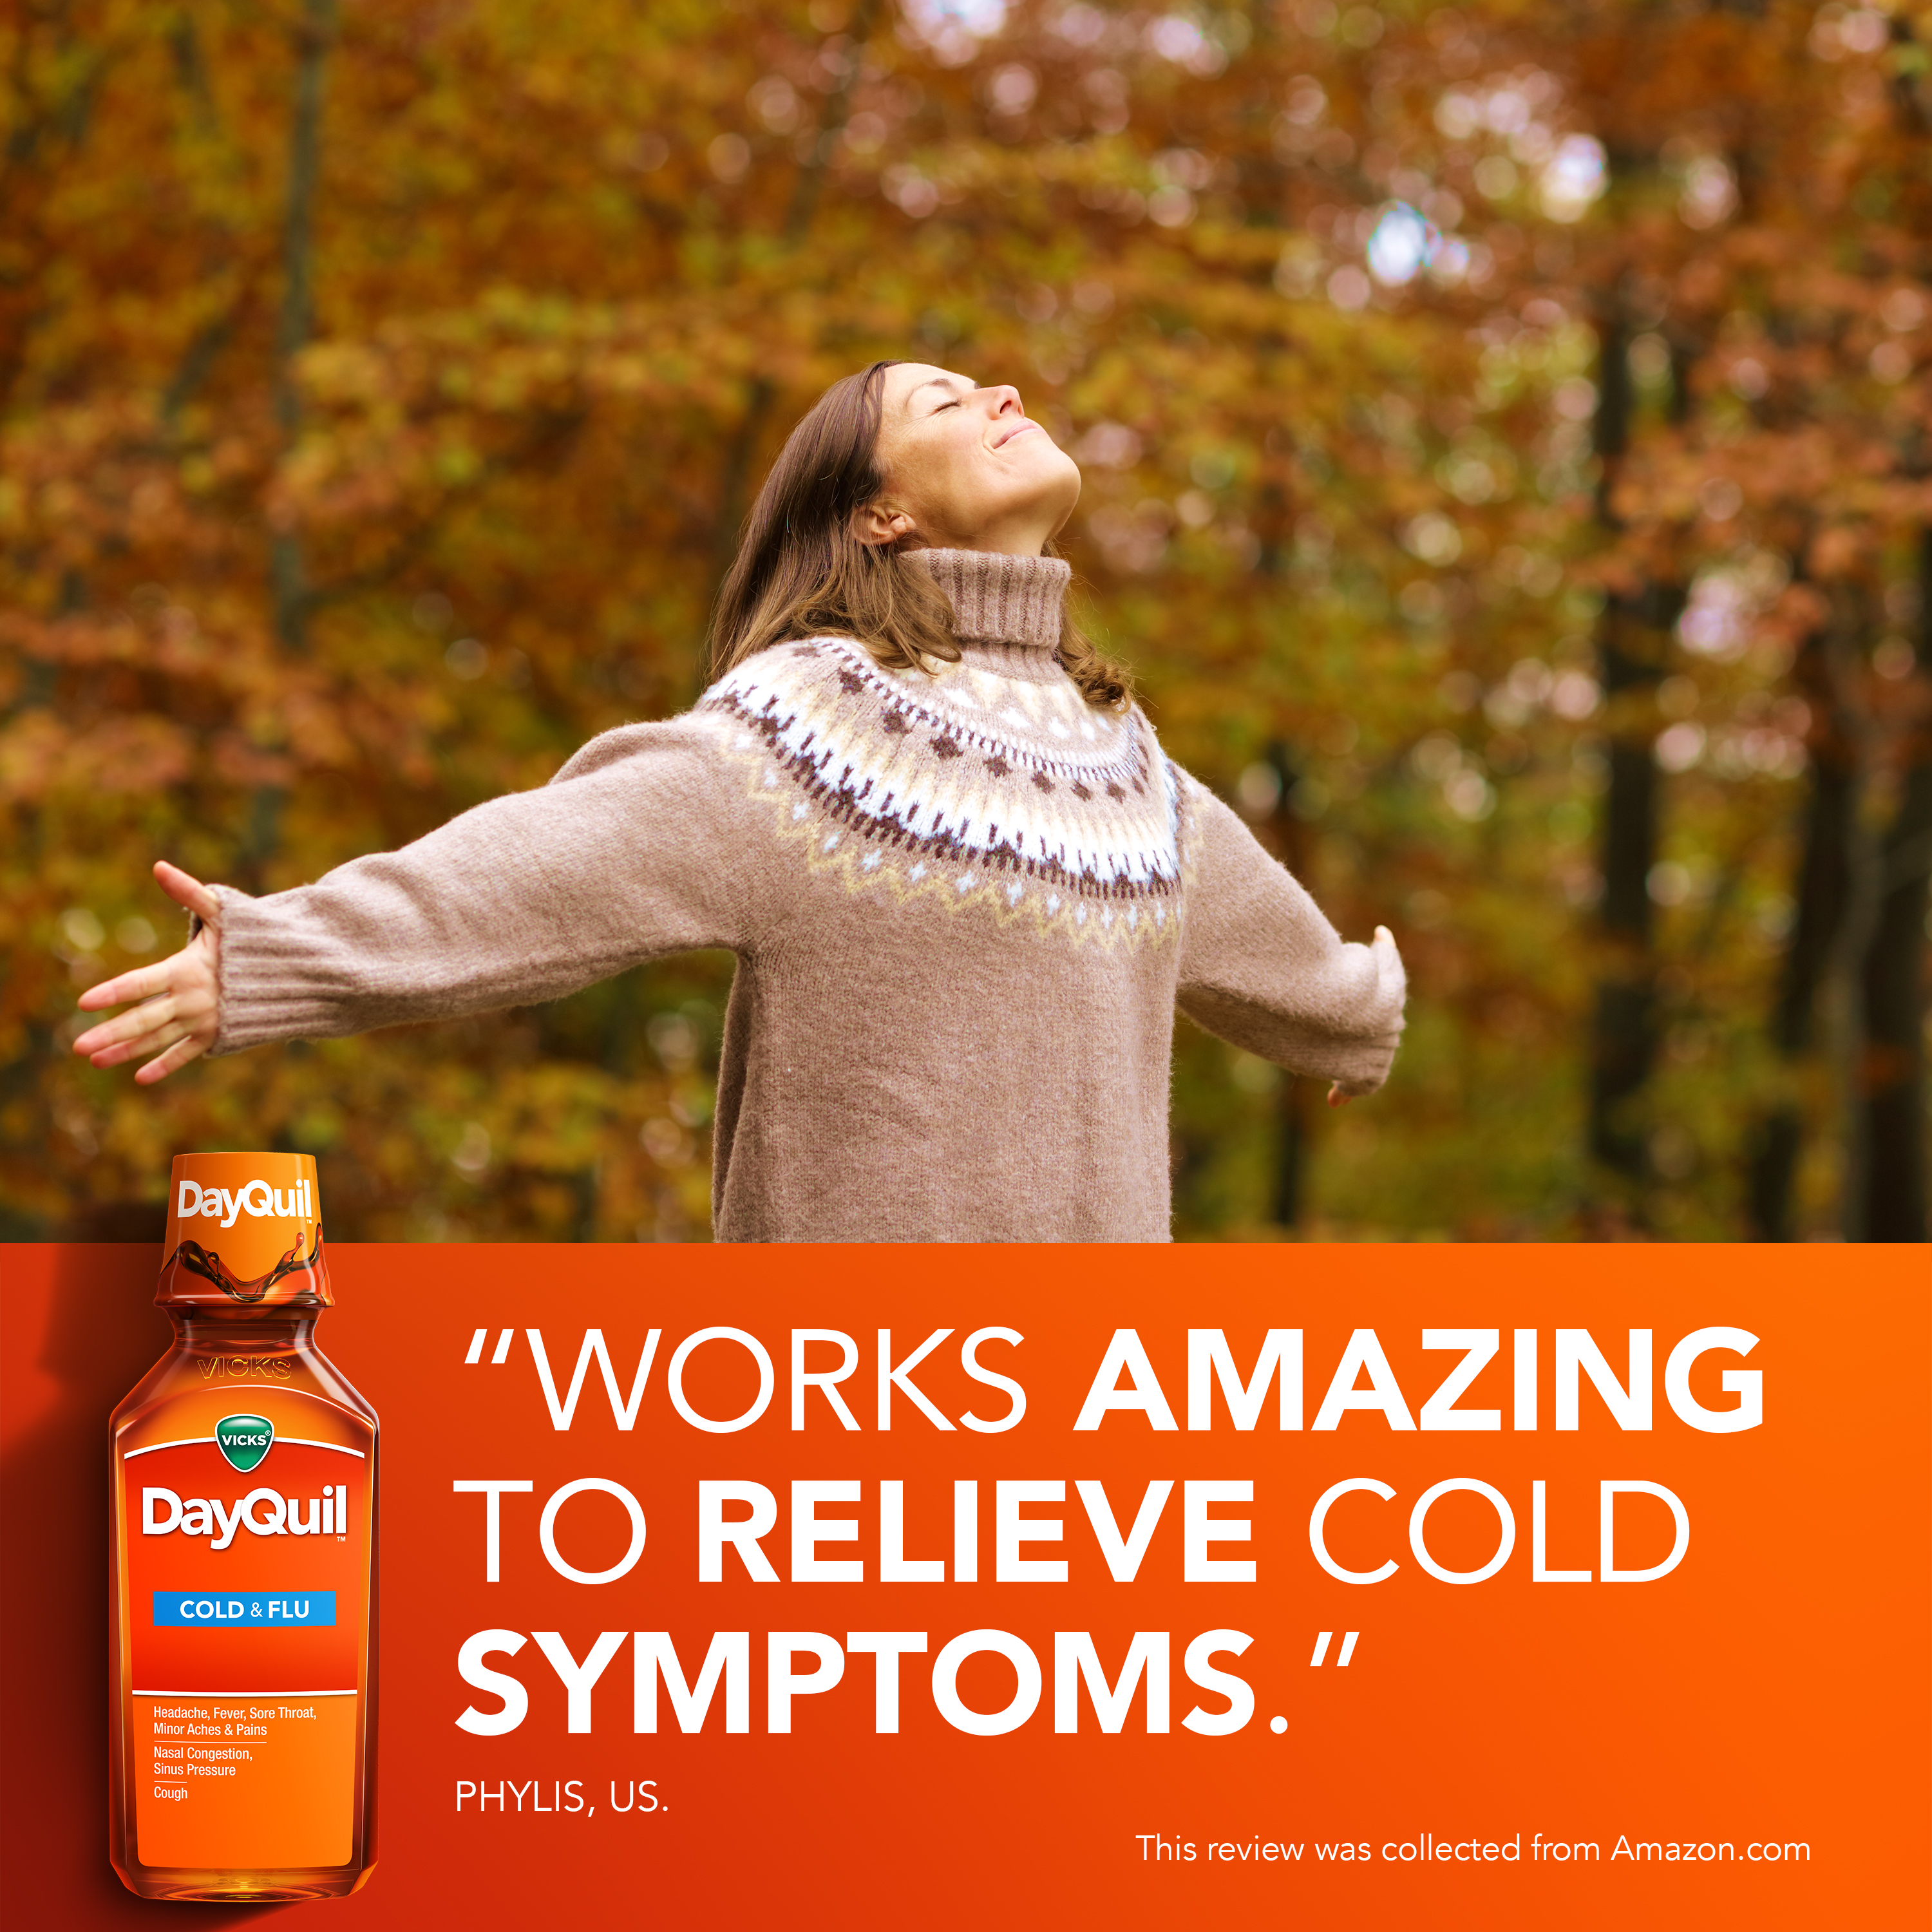 Works Amazing to relieve cold symptoms